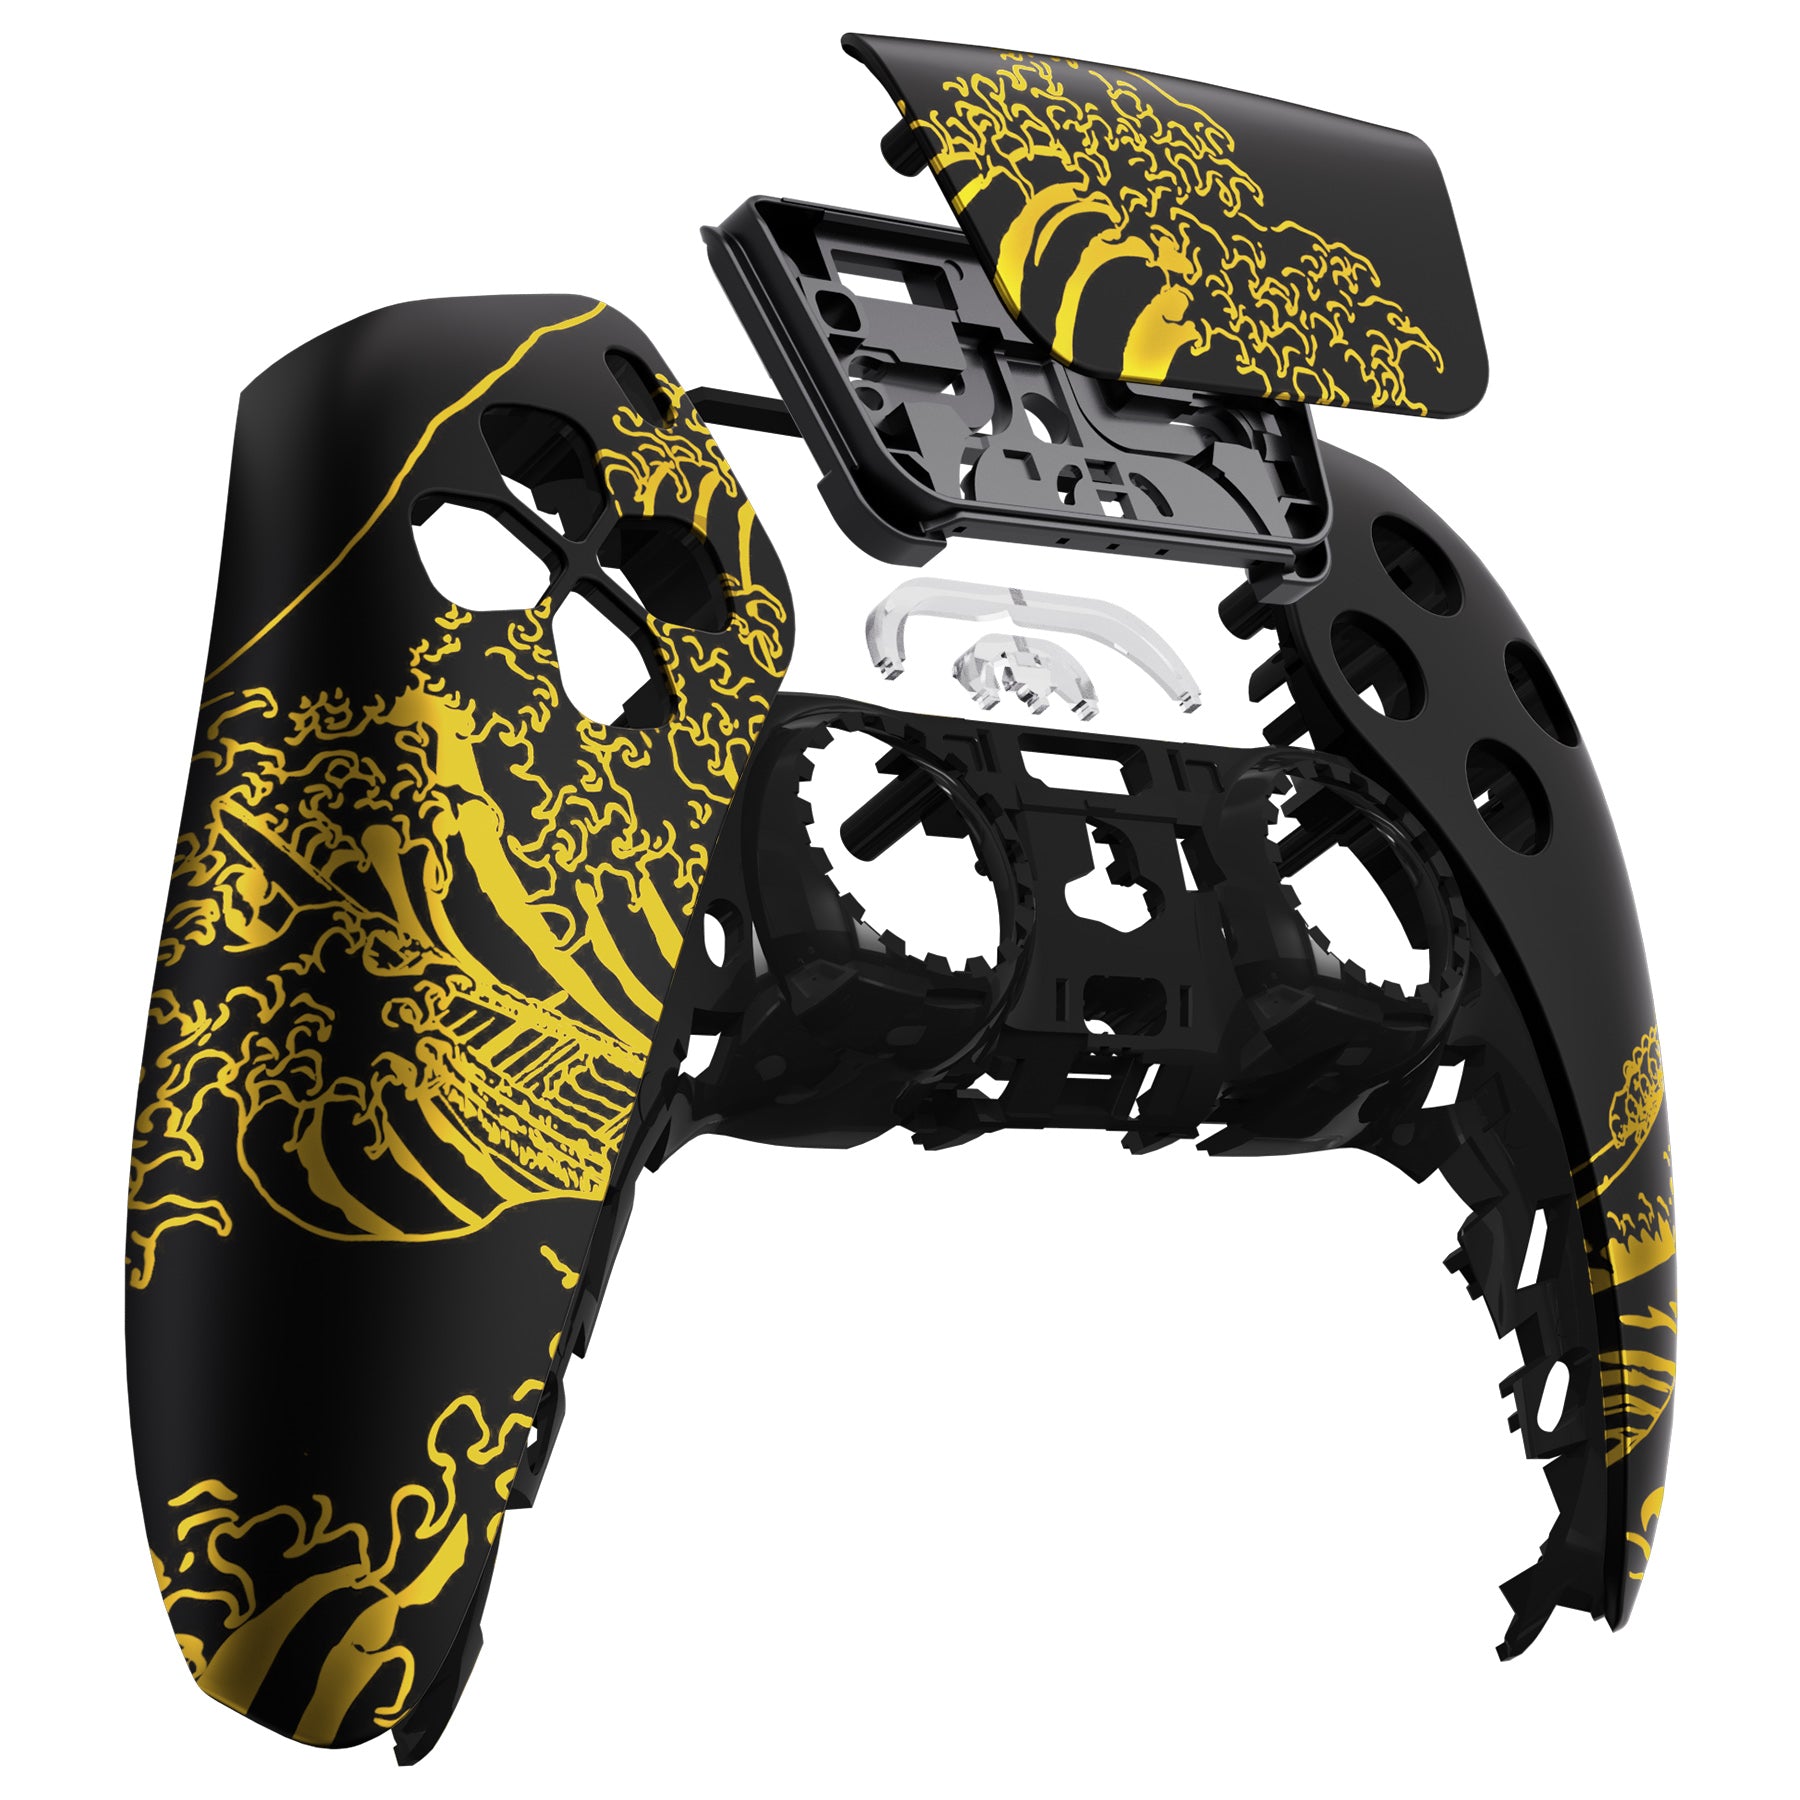 eXtremeRate Retail The Great GOLDEN Wave Off Kanagawa - Black Front Housing Shell Compatible with ps5 Controller BDM-010 BDM-020 BDM-030, DIY Replacement Shell Custom Touch Pad Cover Compatible with ps5 Controller - ZPFT1094G3